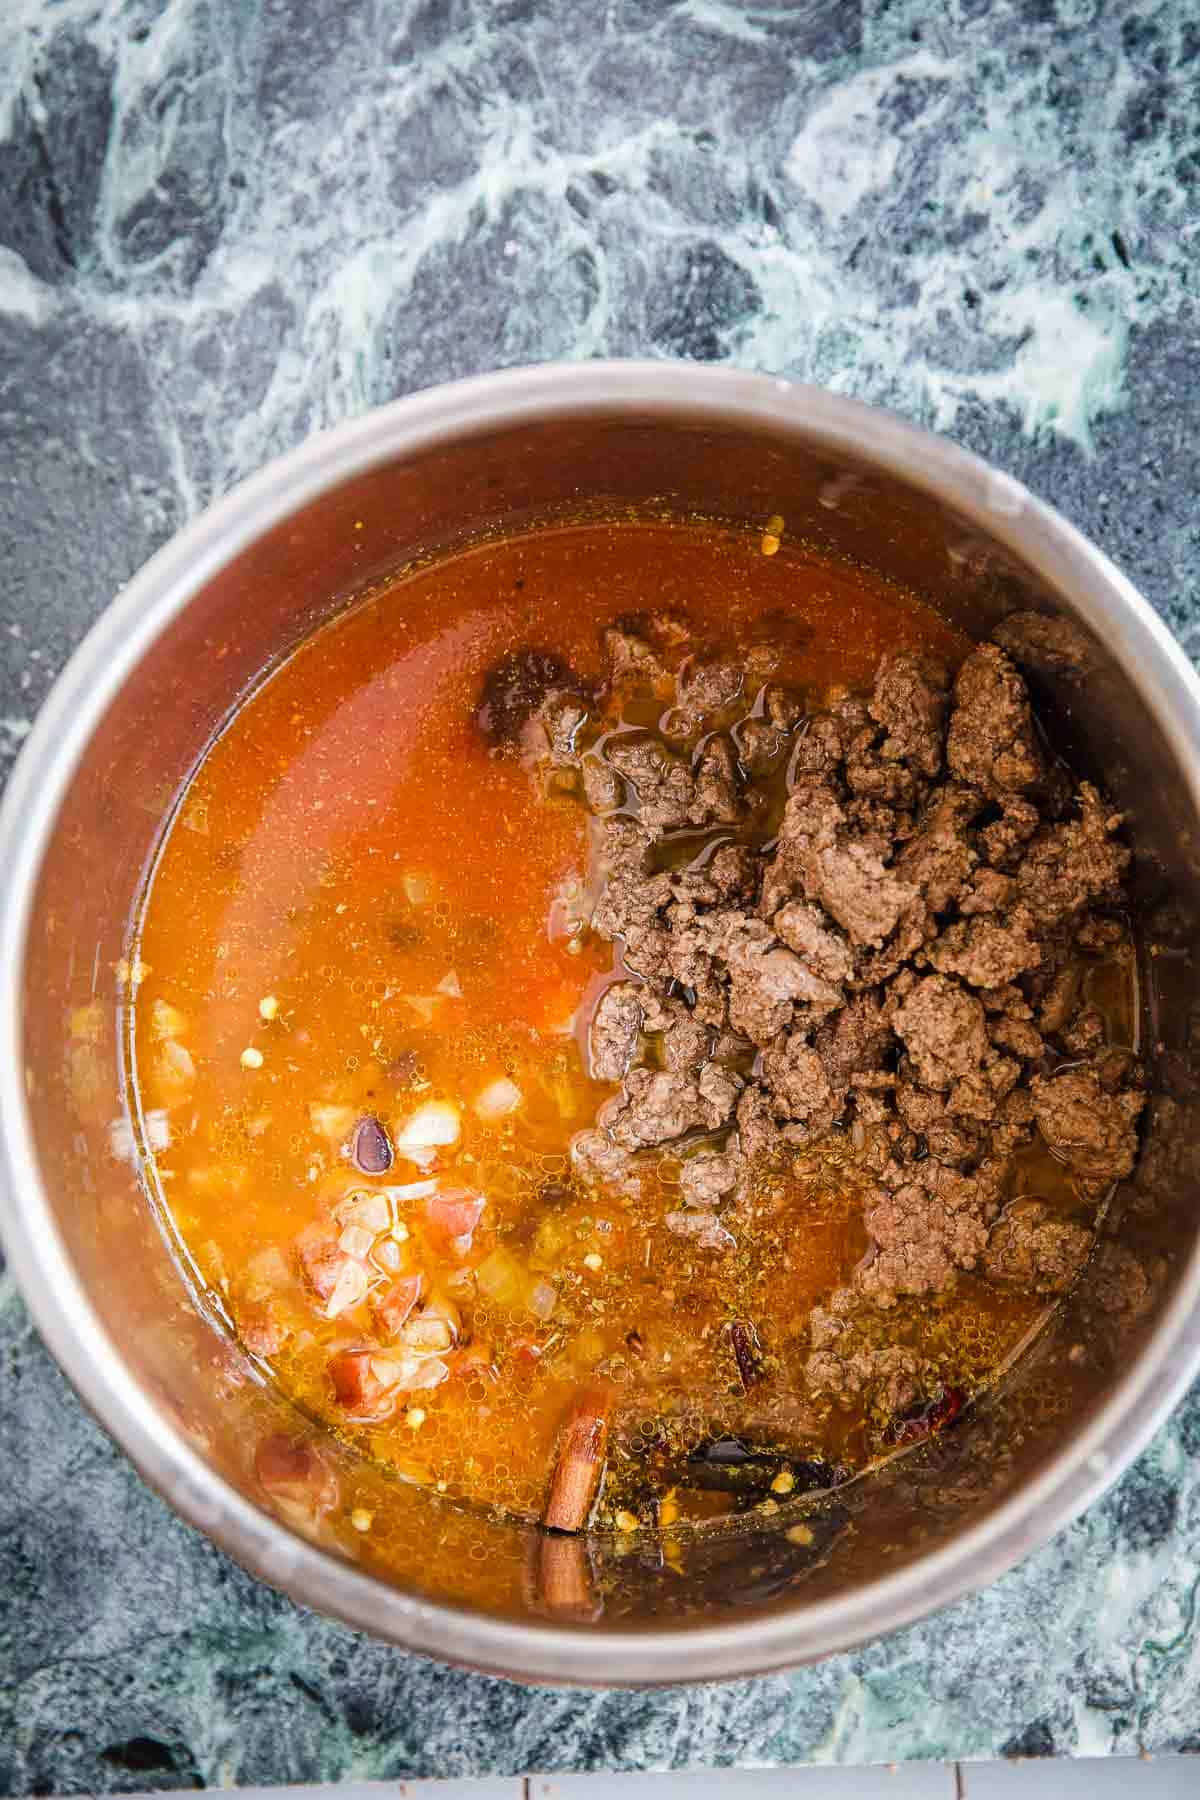 Browned meat and chili ingredients in an Instant Pot bowl.